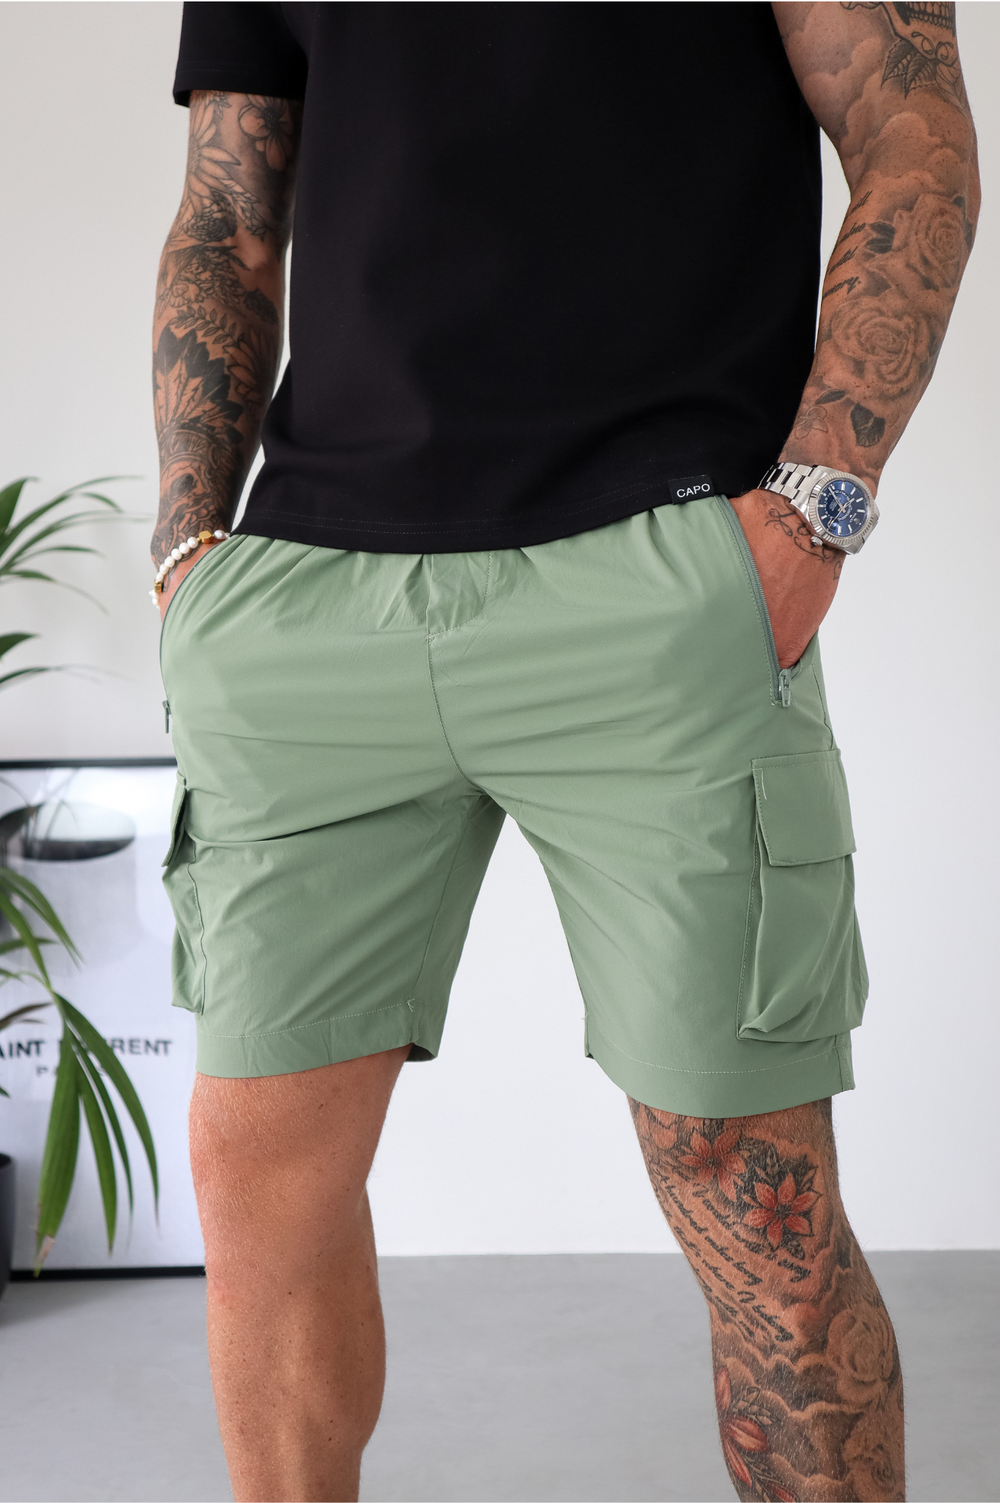 Capo LIGHTWEIGHT Cargo Short - Olive – CAPO | Meaning Behind The Brand